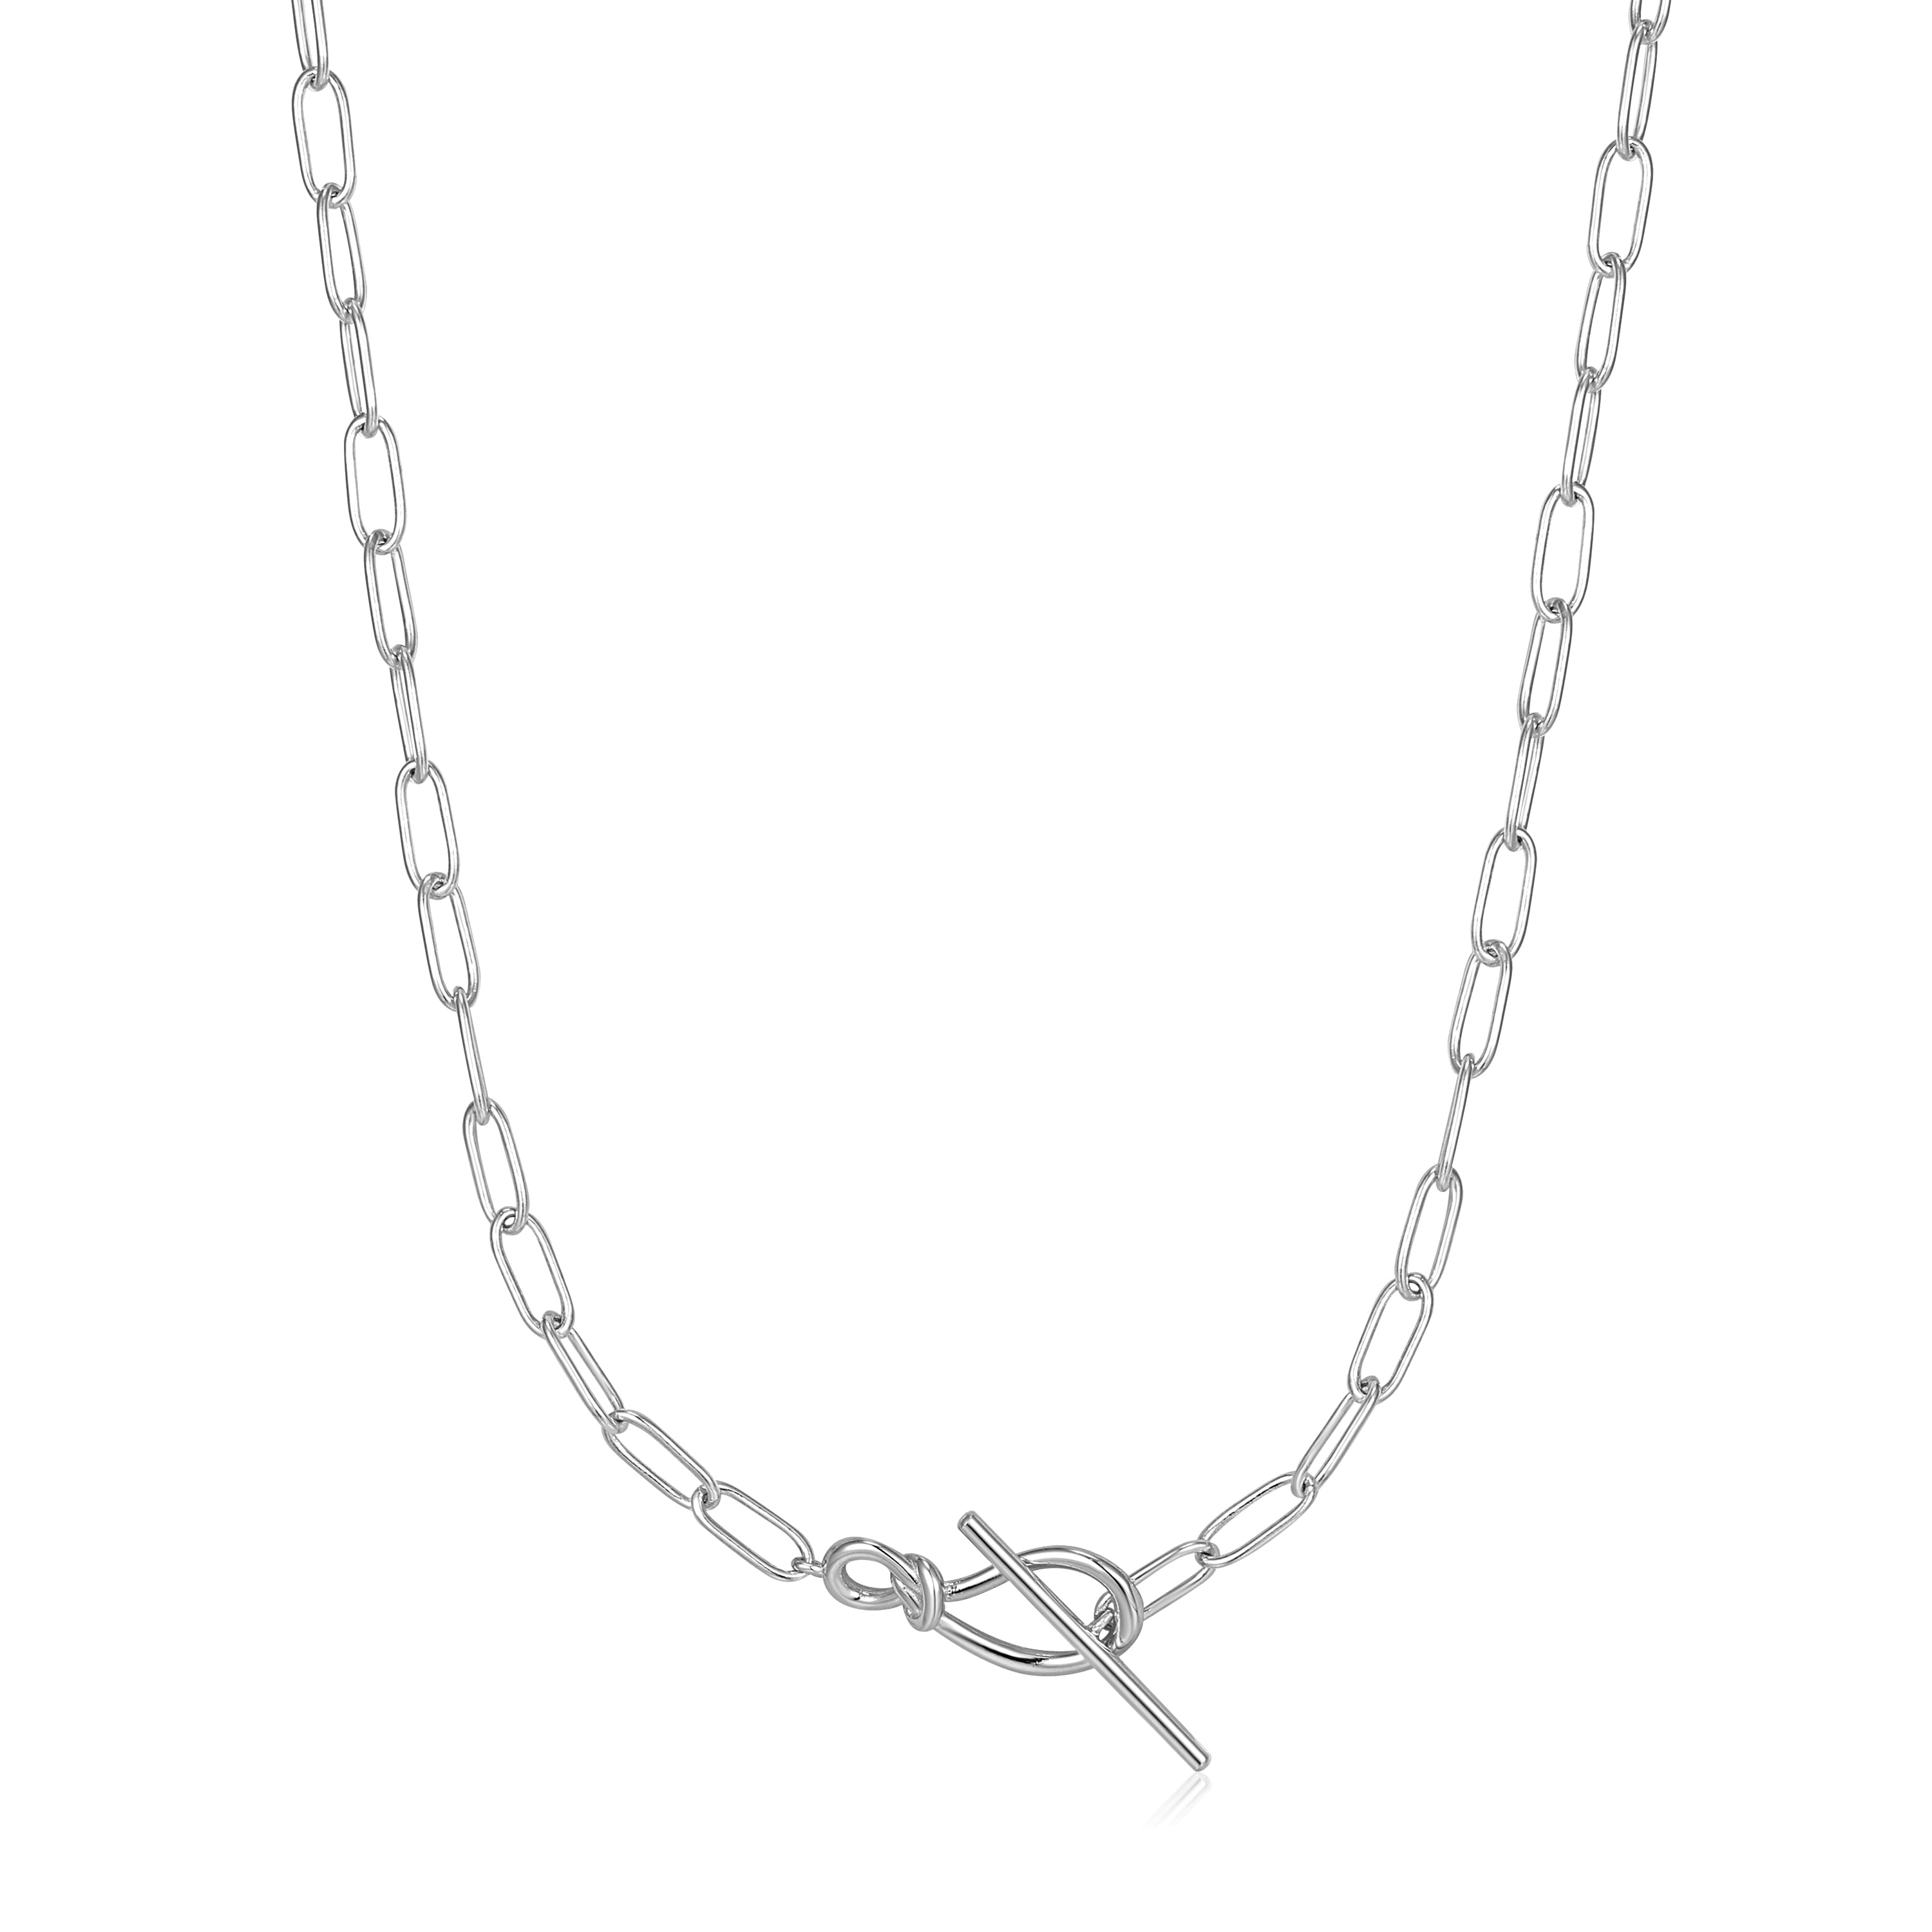 Buy Sterling Silver T-bar Necklace, S 925 Paper Clip Chain Necklace, Toggle  Clasp Necklace, S925 Silver Long Link Jewellery, Gift for Women Online in  India - Etsy